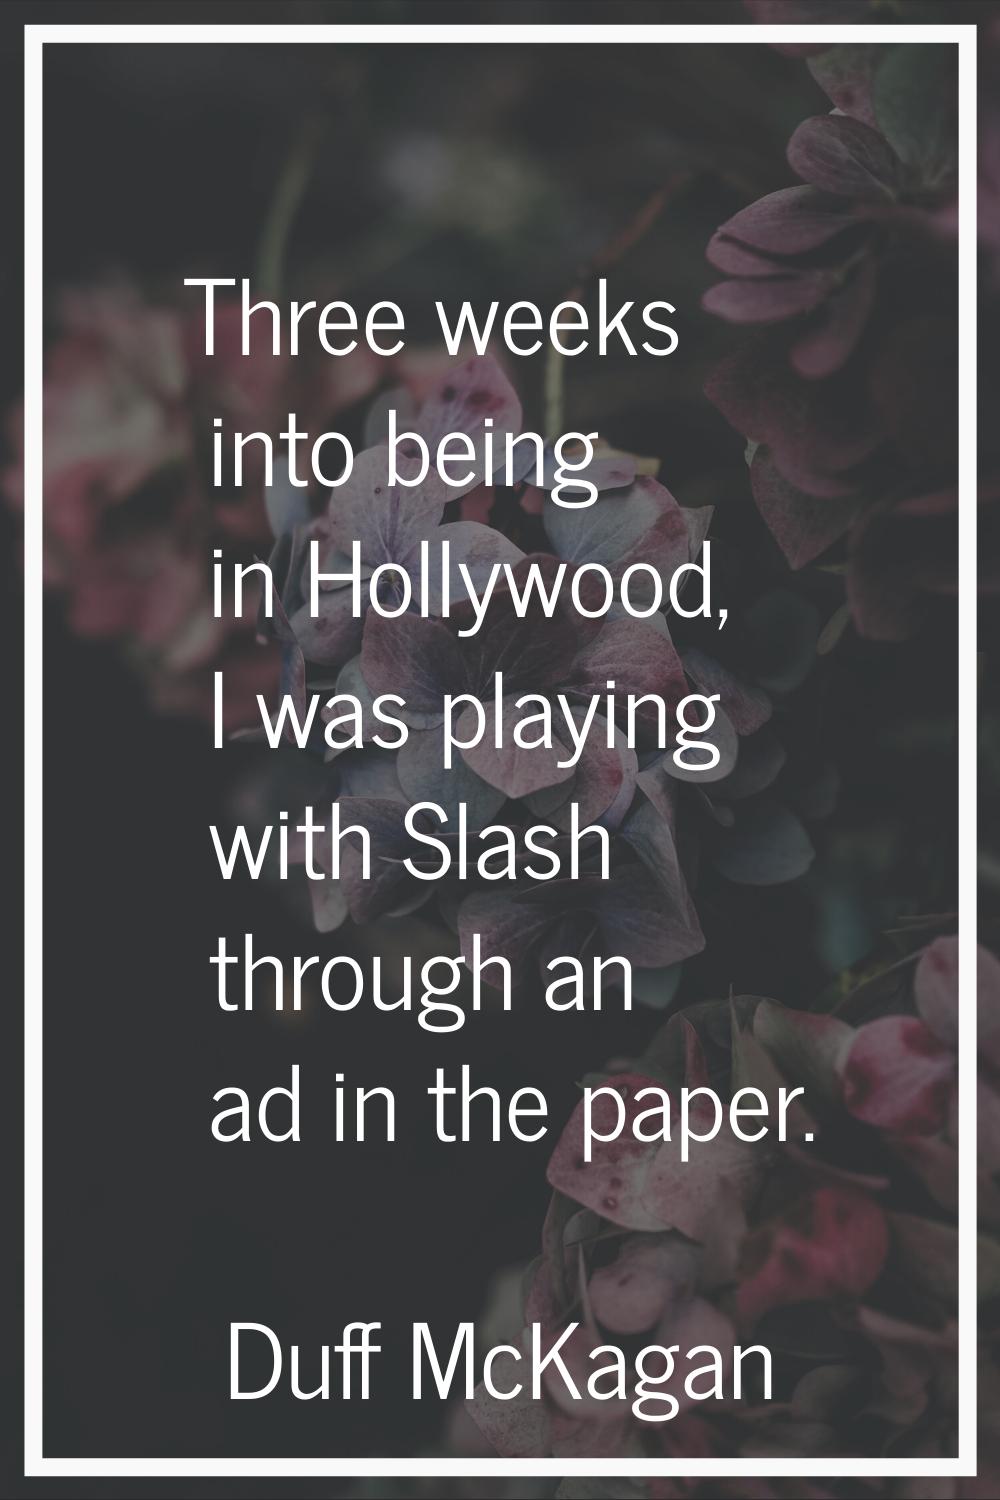 Three weeks into being in Hollywood, I was playing with Slash through an ad in the paper.